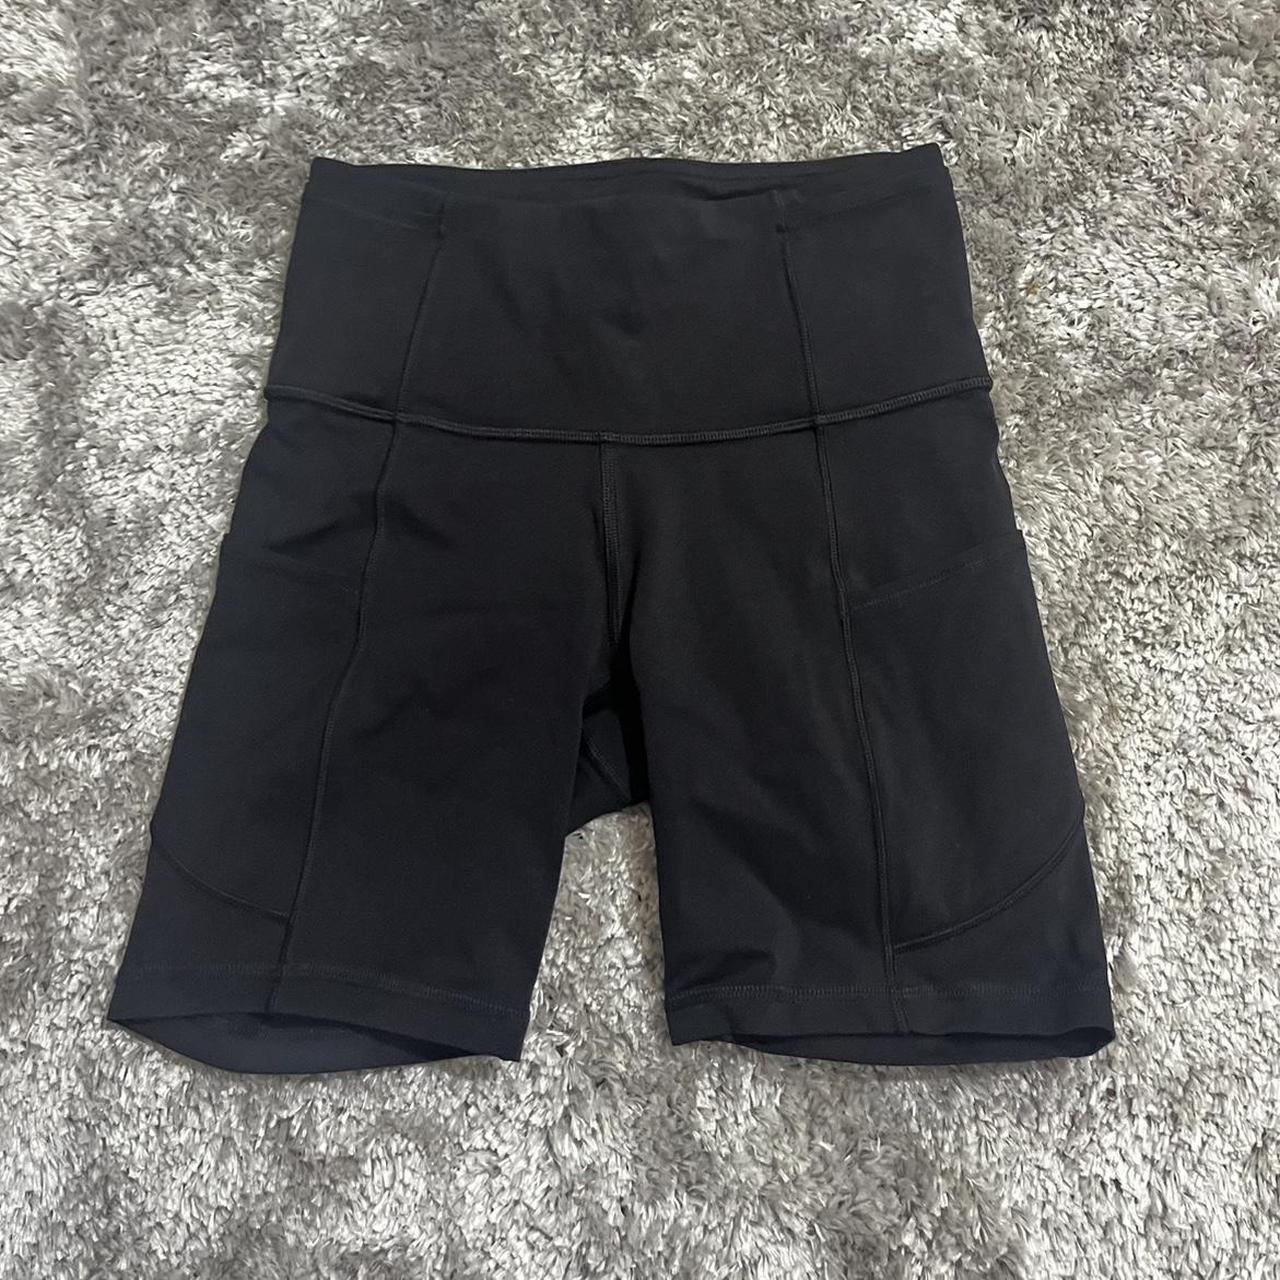 Lululemon fast and free high rise shorts 6” In... - Depop